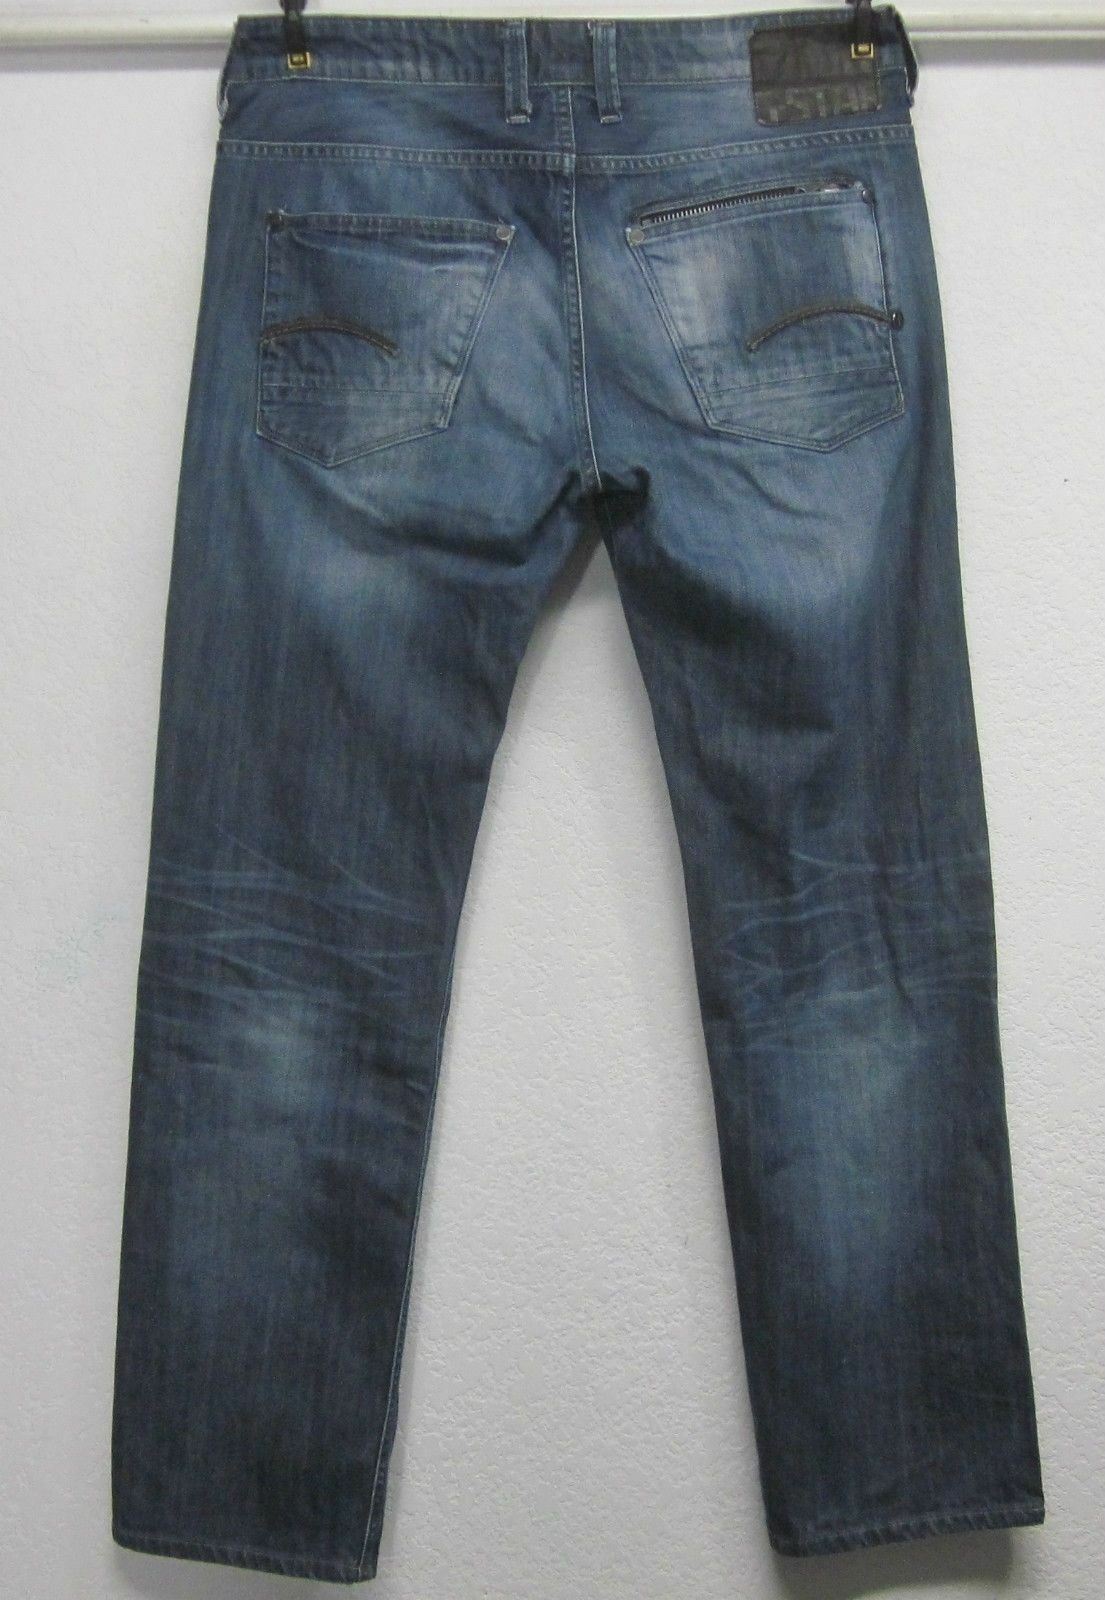 AUTHENTIC G-STAR GS RAW 01 SLIM FIT BLUE JEANS MEN'S 35x32 BUTTON FLY ...